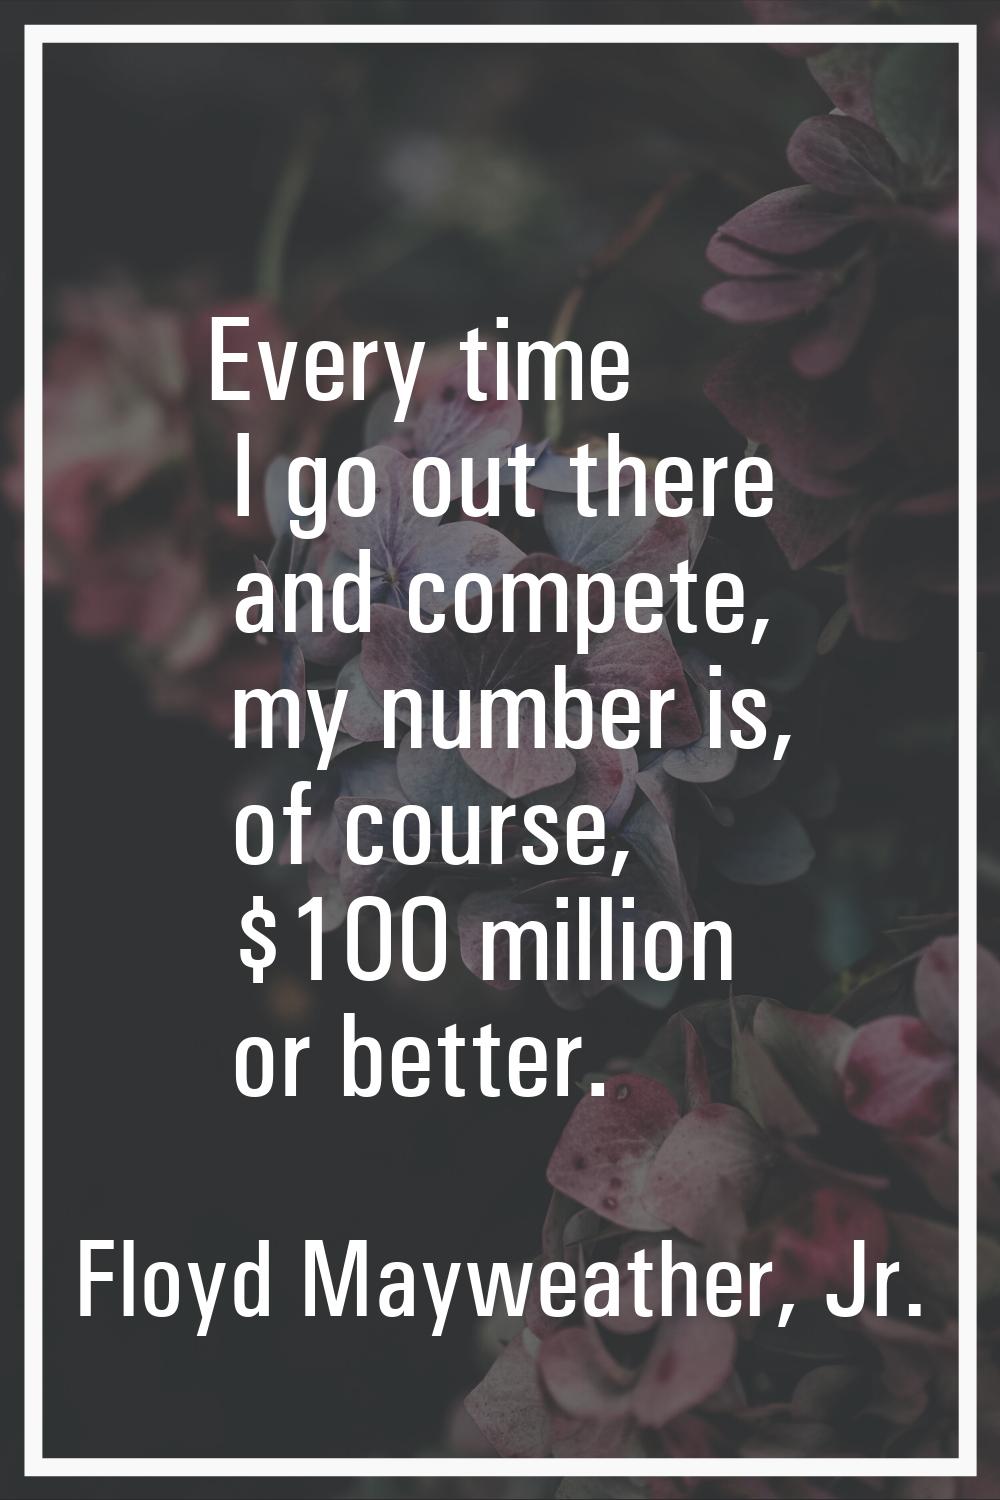 Every time I go out there and compete, my number is, of course, $100 million or better.